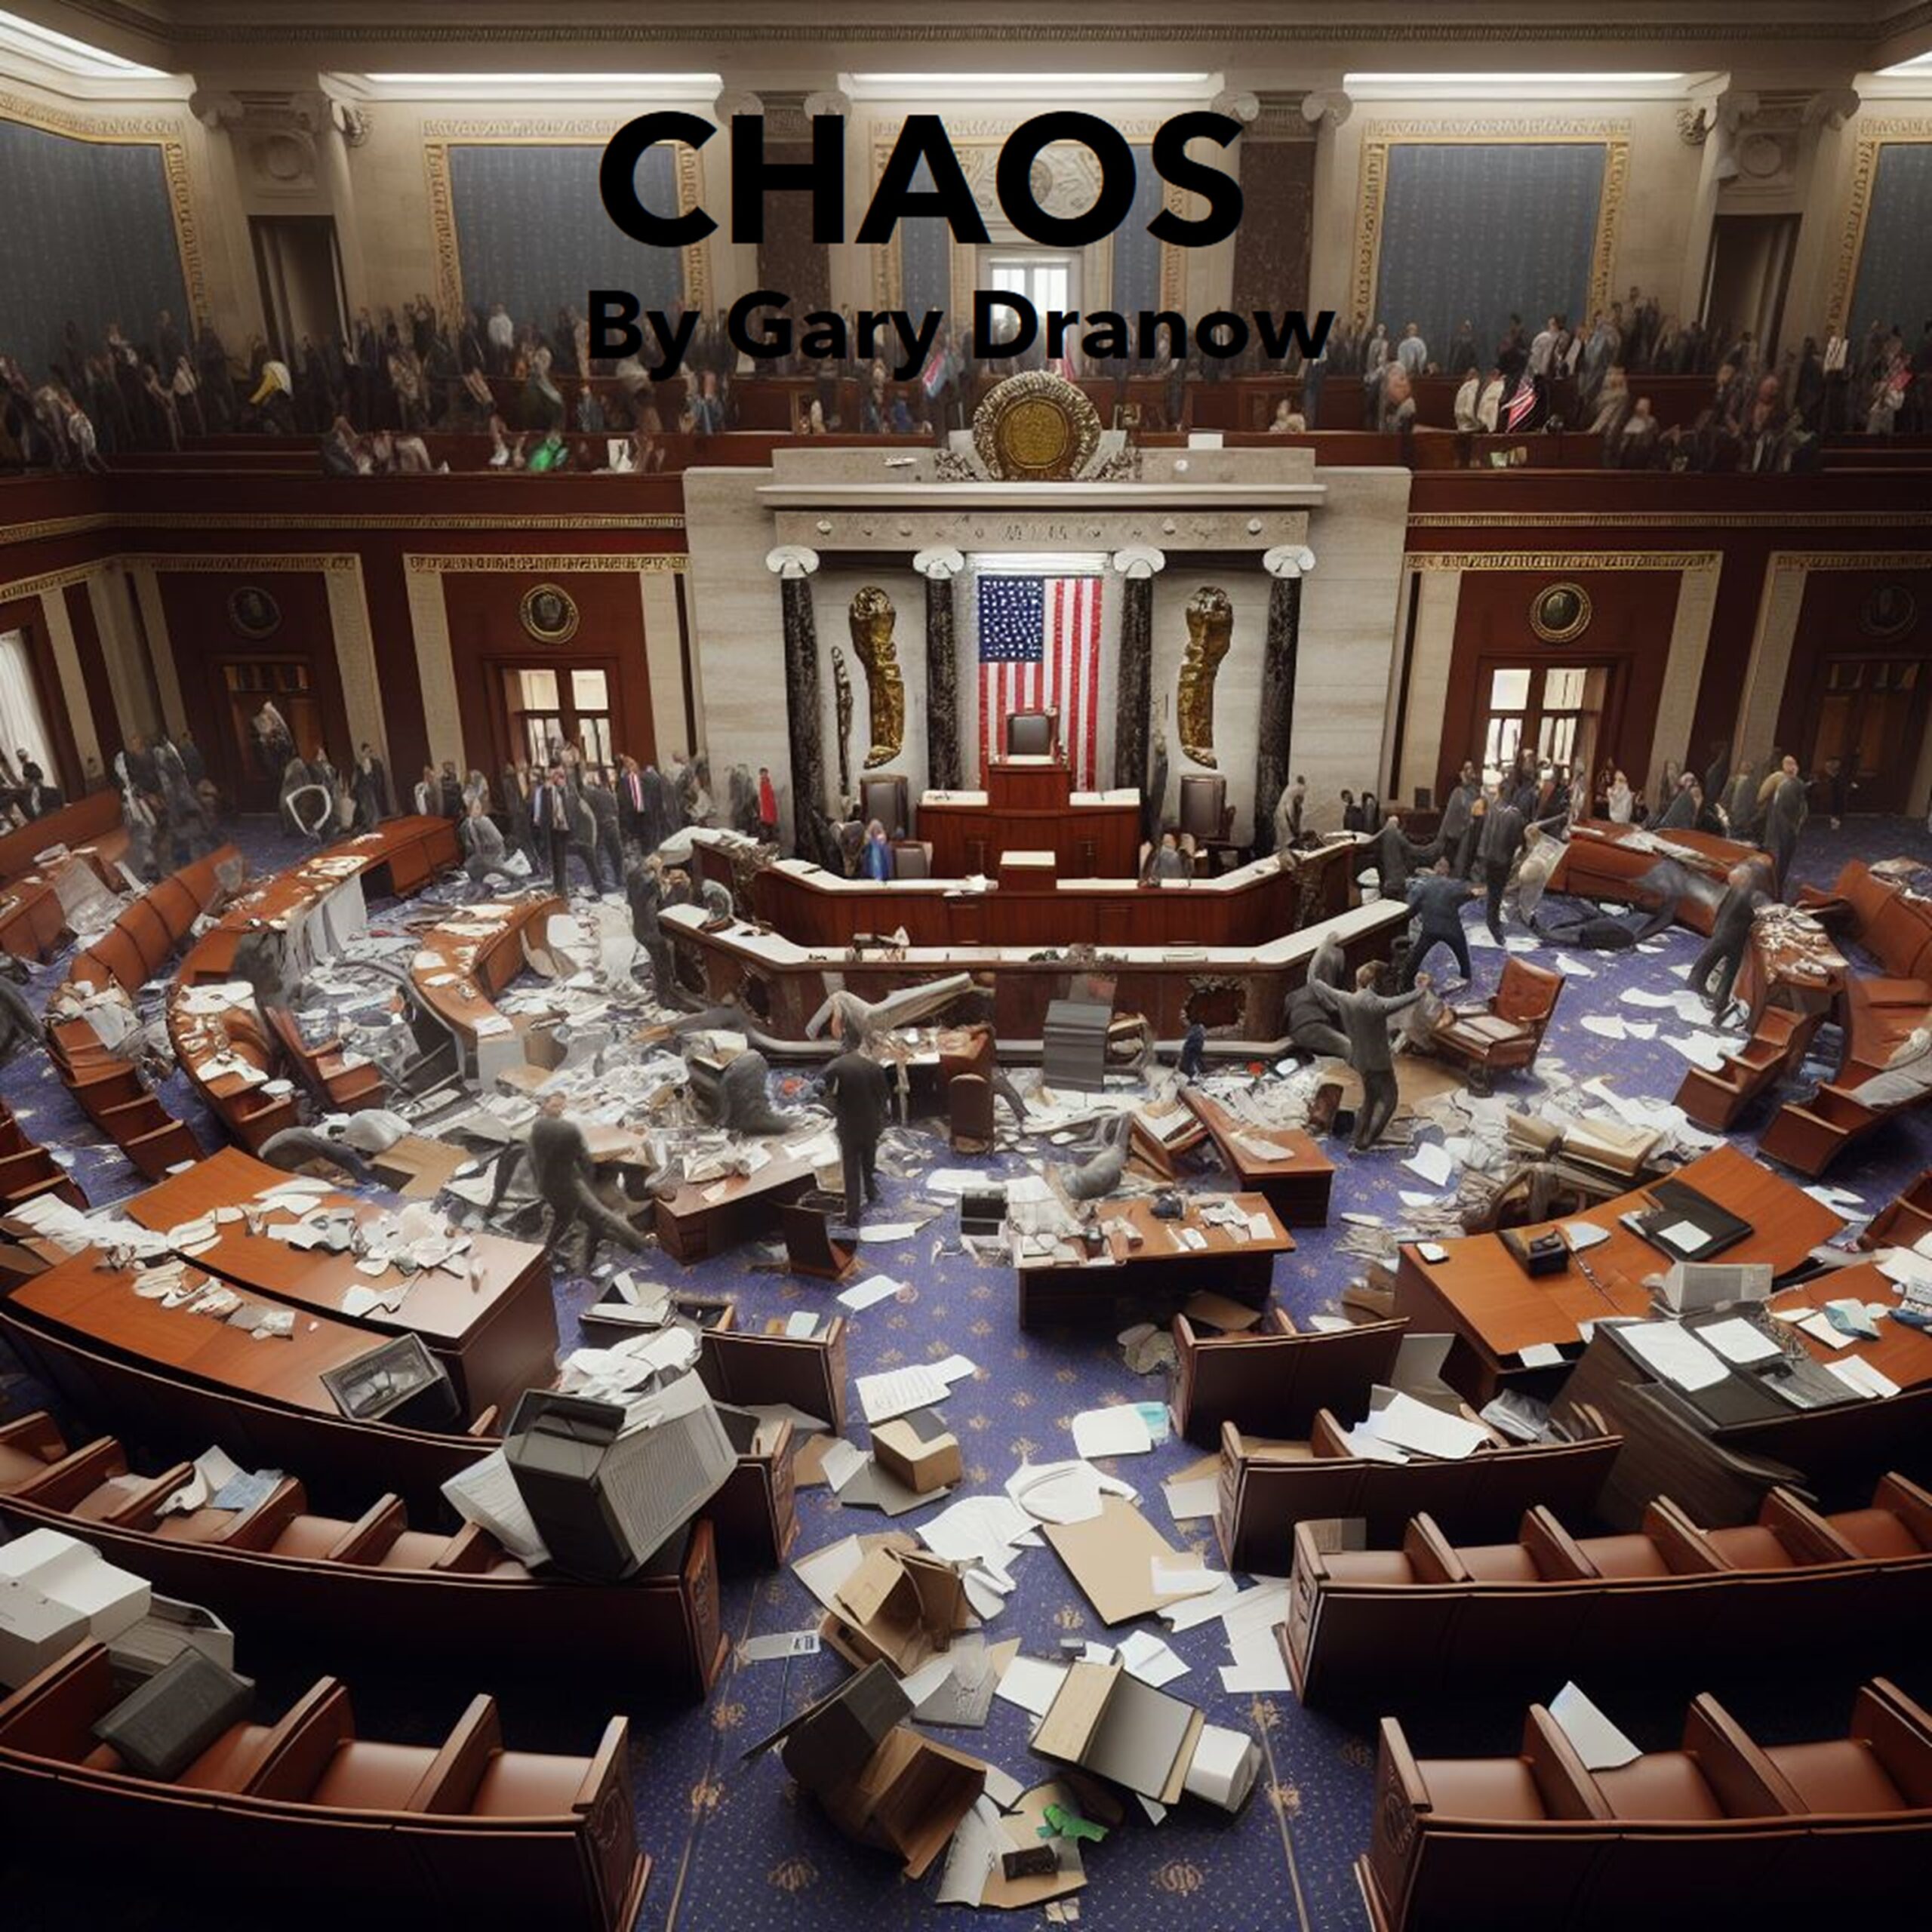 Gary Dranow Unleashes Political Commentary in “Chaos”: A Fusion of Rock and Storytelling